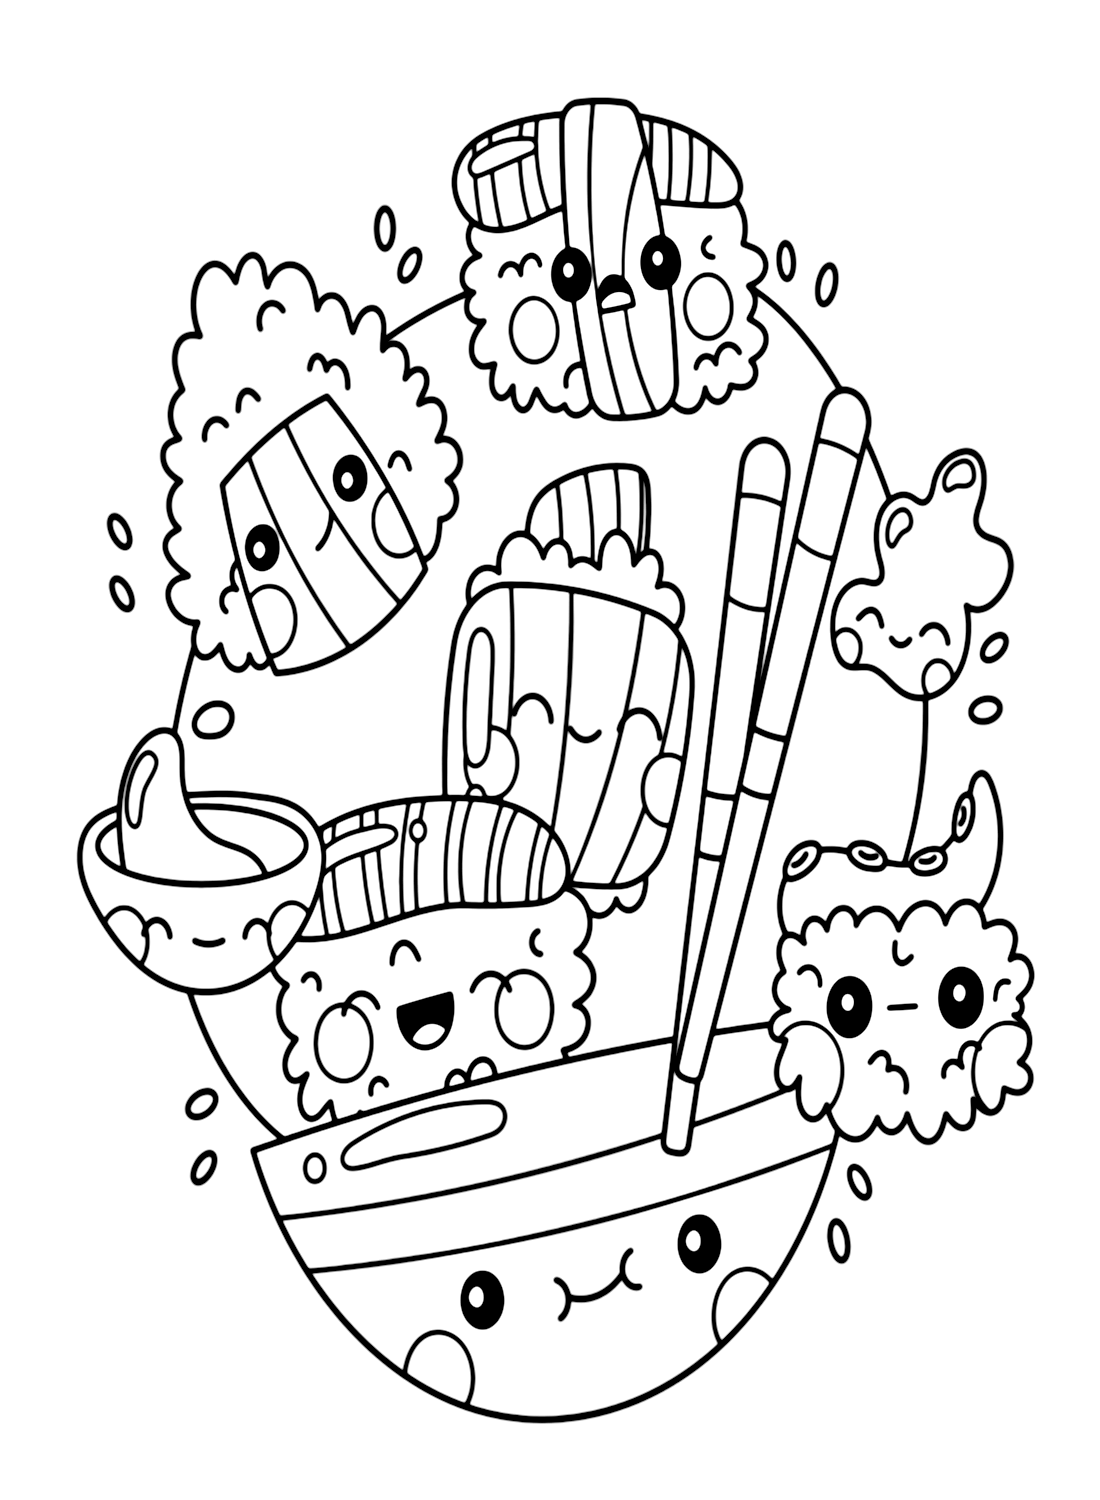 Crayola Christmas Coloring Pages - Free Printable Coloring Pages